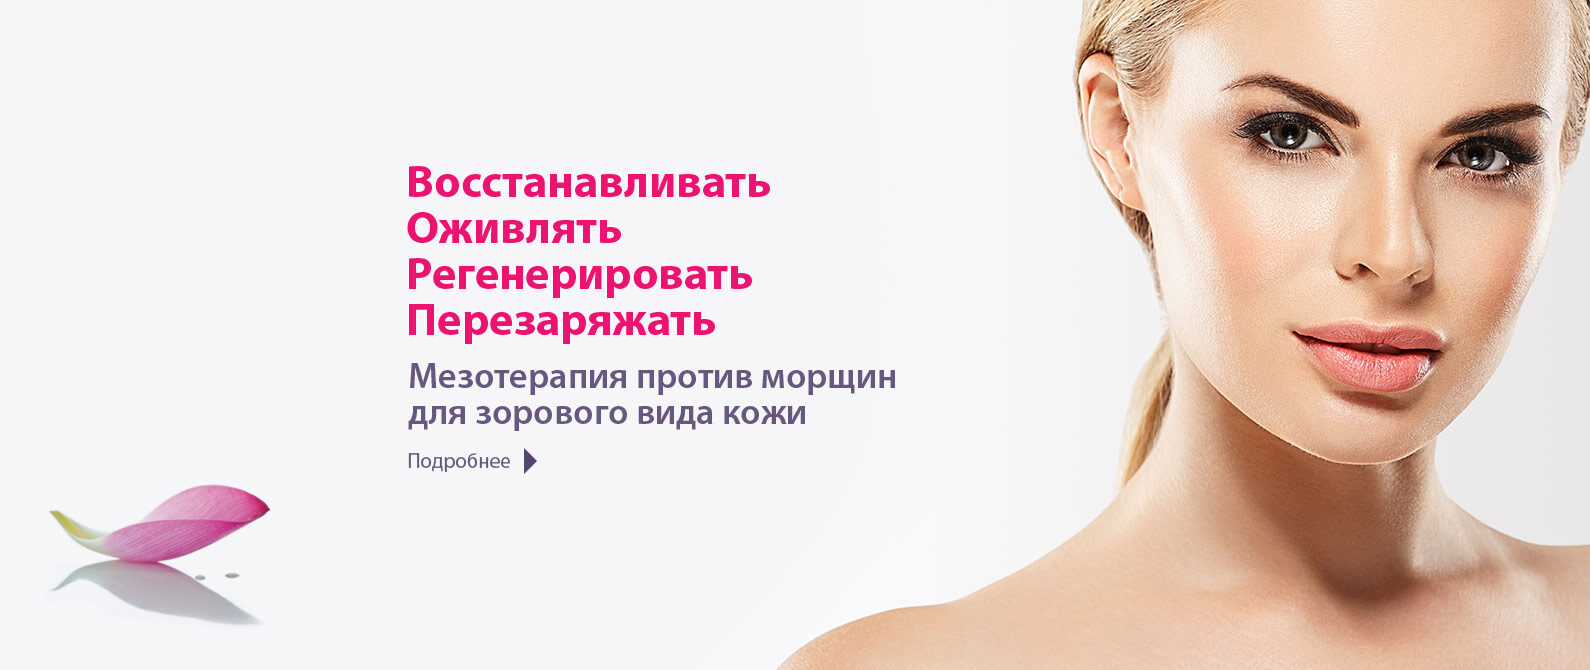 mesotherapy russian banner